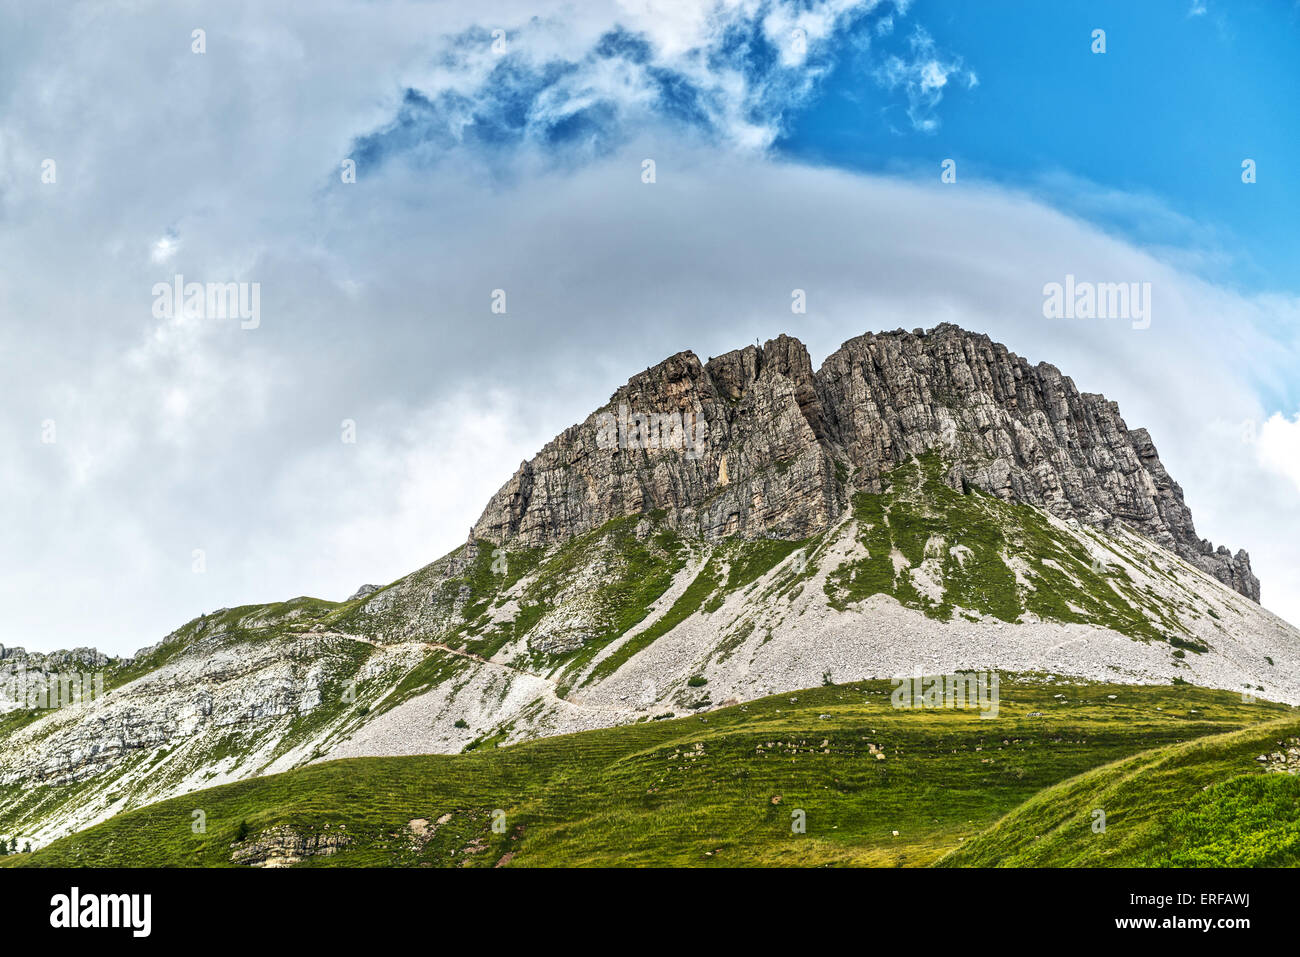 Landscape of the Mountain Castellazzo seen from Rolle Passwith clouds and blue sky background, Dolomites, Trentino - Italy Stock Photo